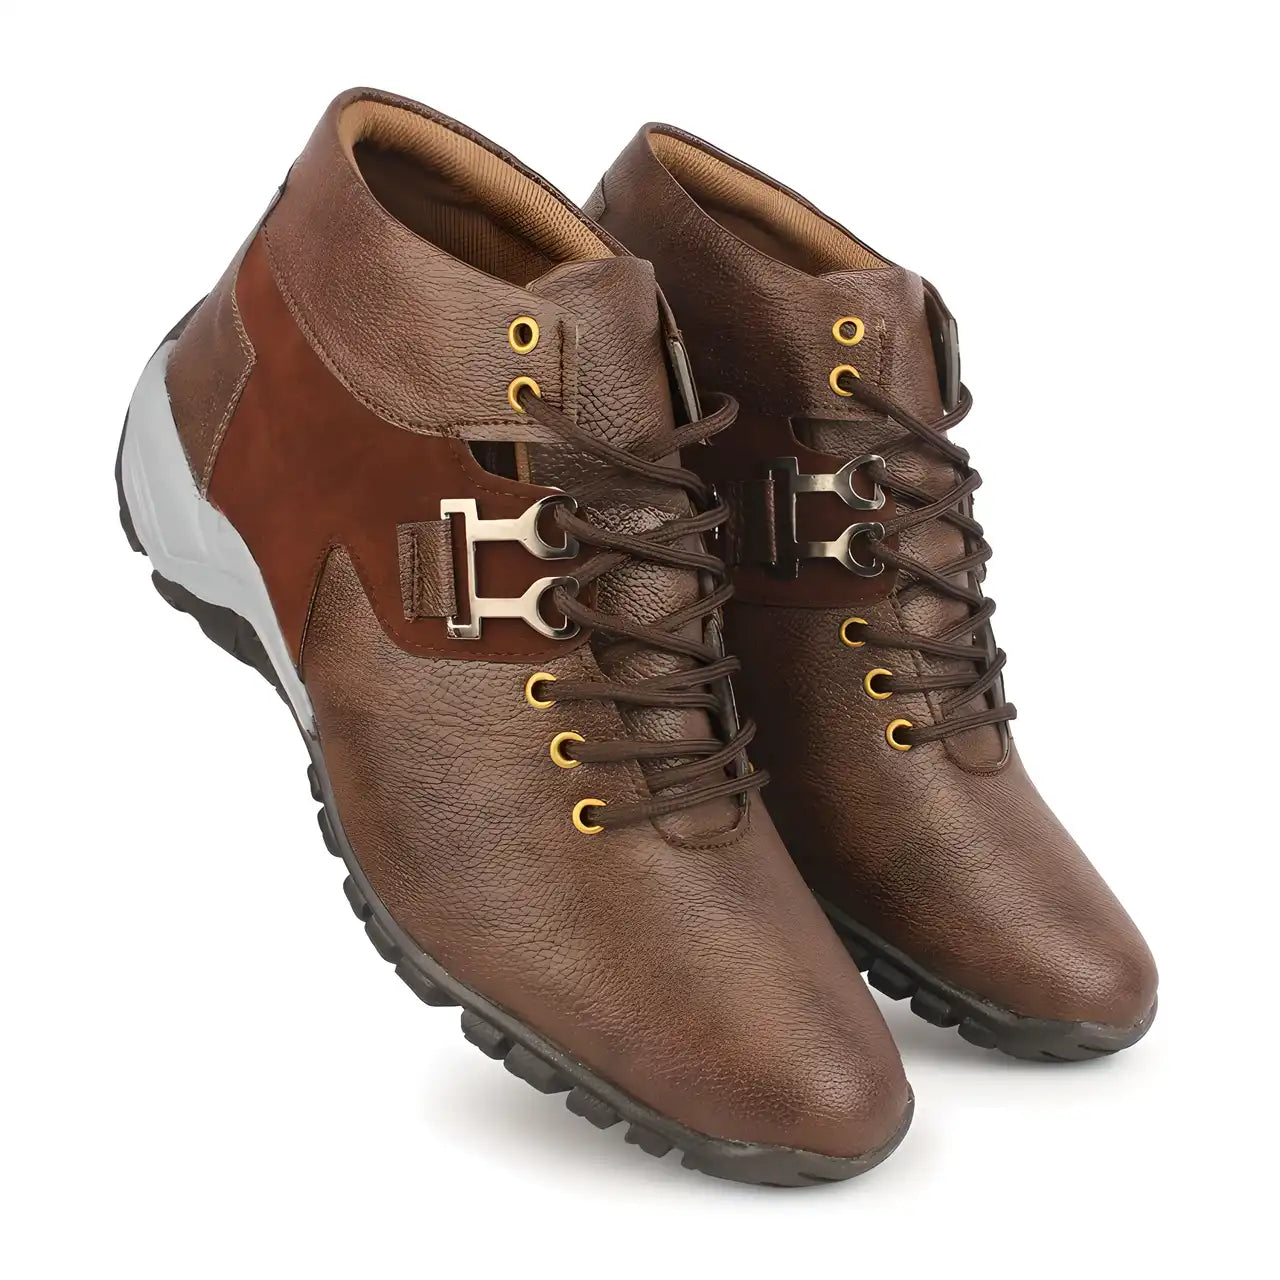 Fashionable 300 Boot Shoes for Men